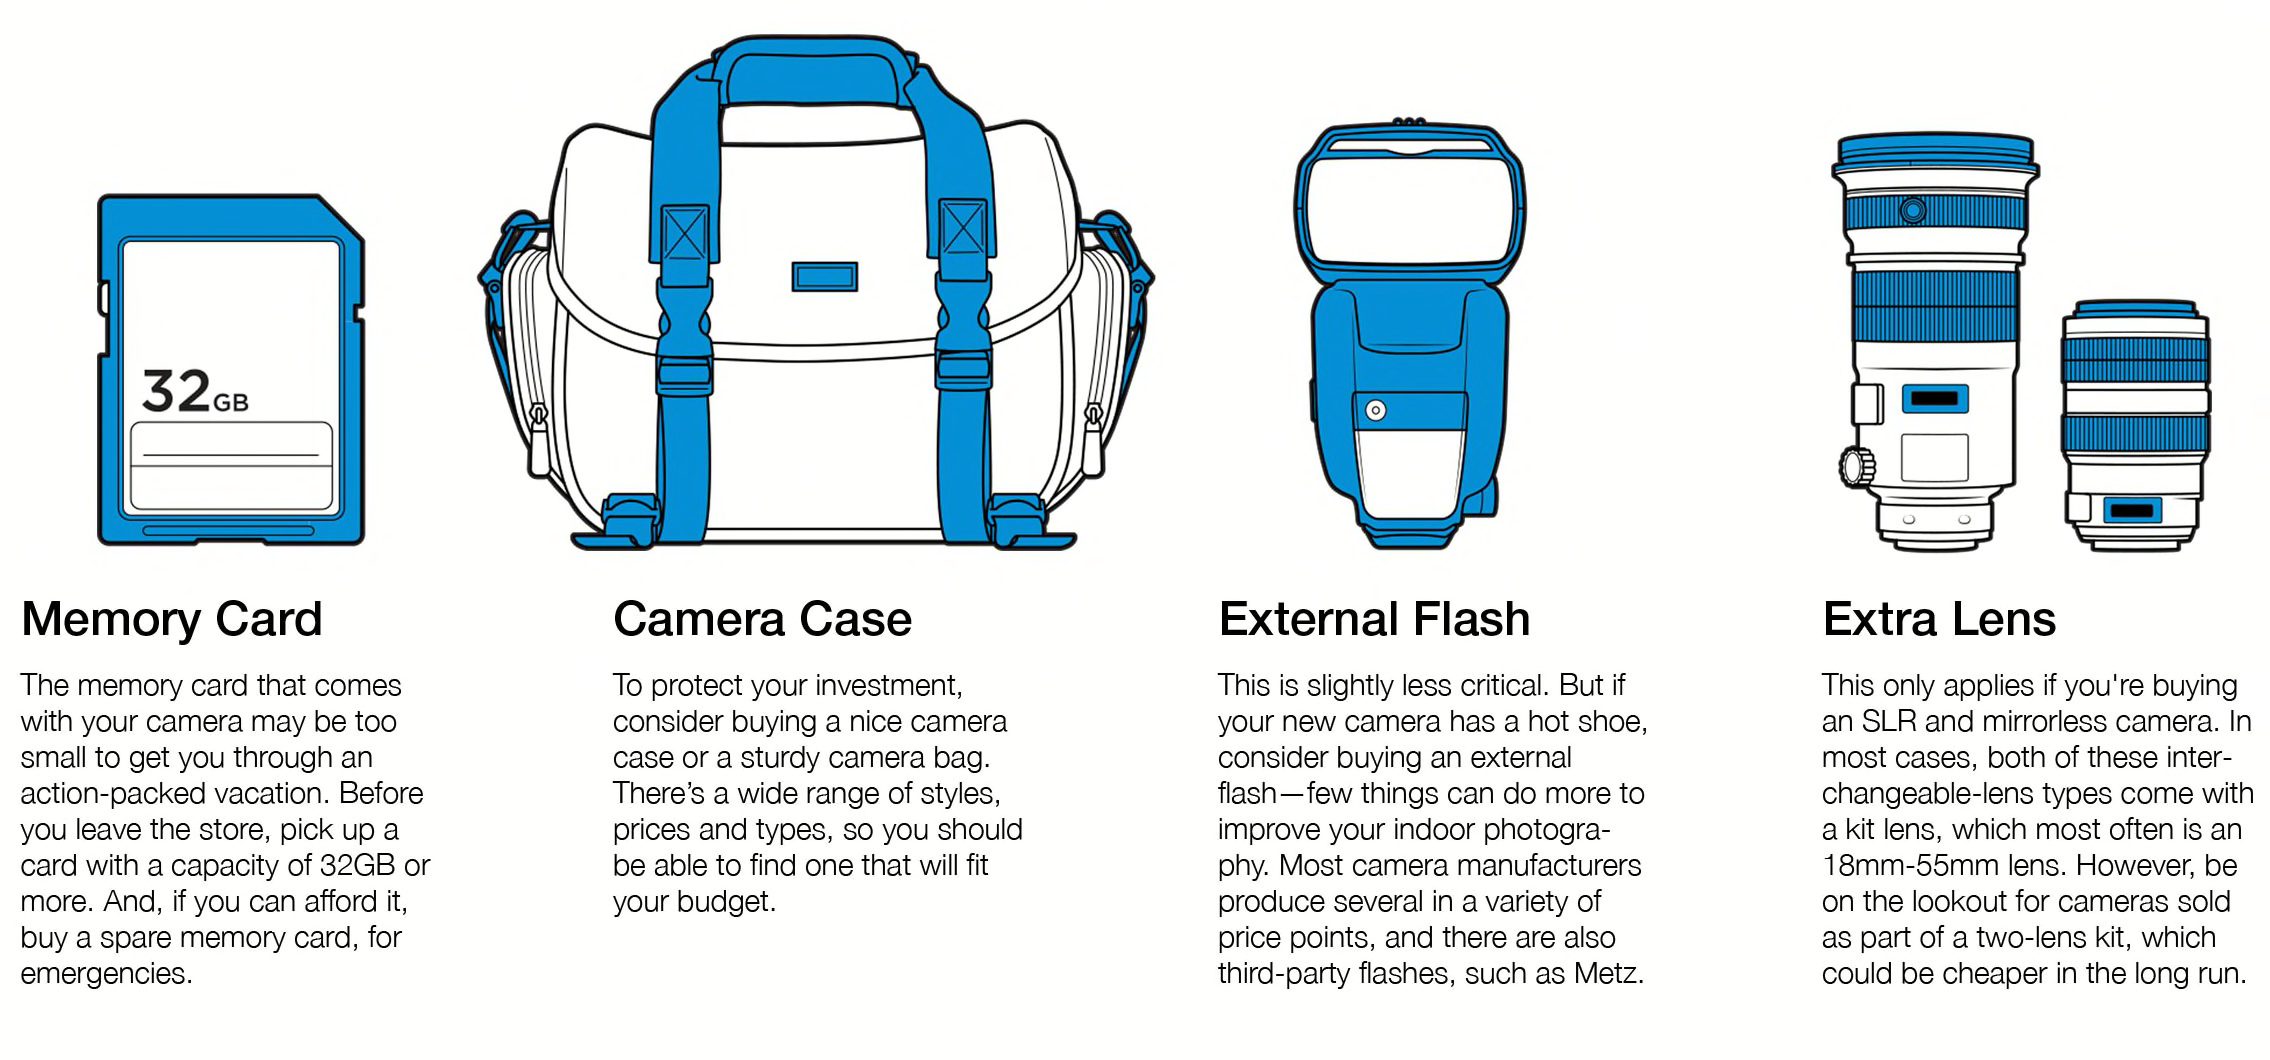 An illustration of a memory card, a camera case, an external flash, and an extra lens.